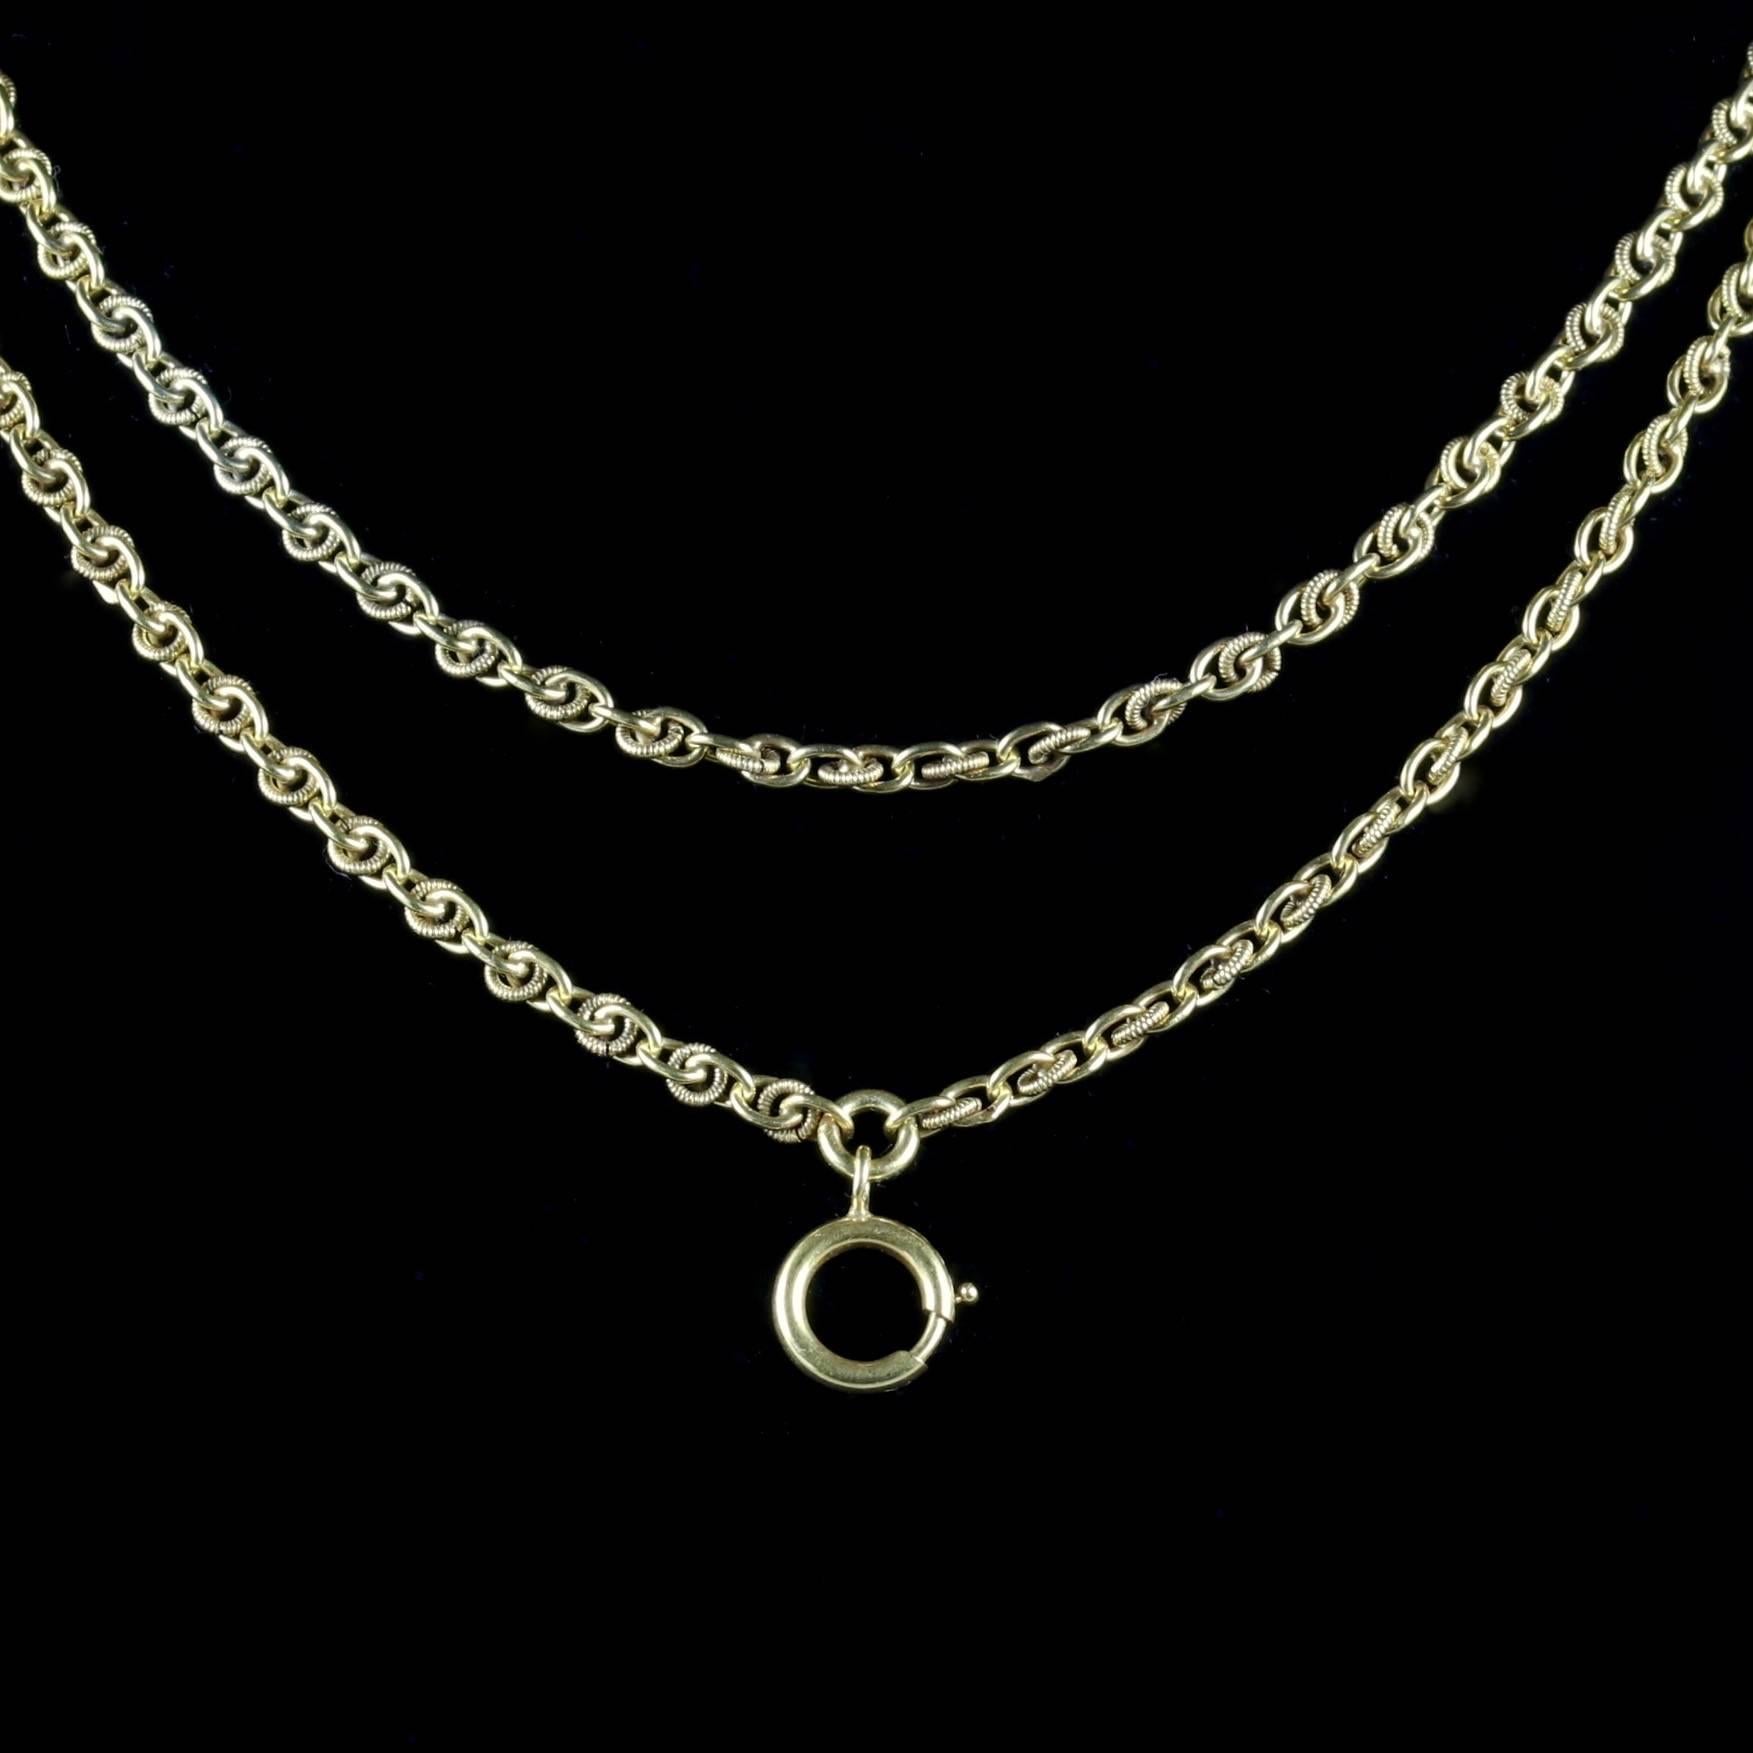 This wonderful Victorian 18ct Yellow Gold on Silver guard chain is Circa 1900.

Each link boasts Victorian workmanship all round.

The chain leads to a clasp, so you can attach your own pendant.

It is steeped in history from the Victorian era.

The